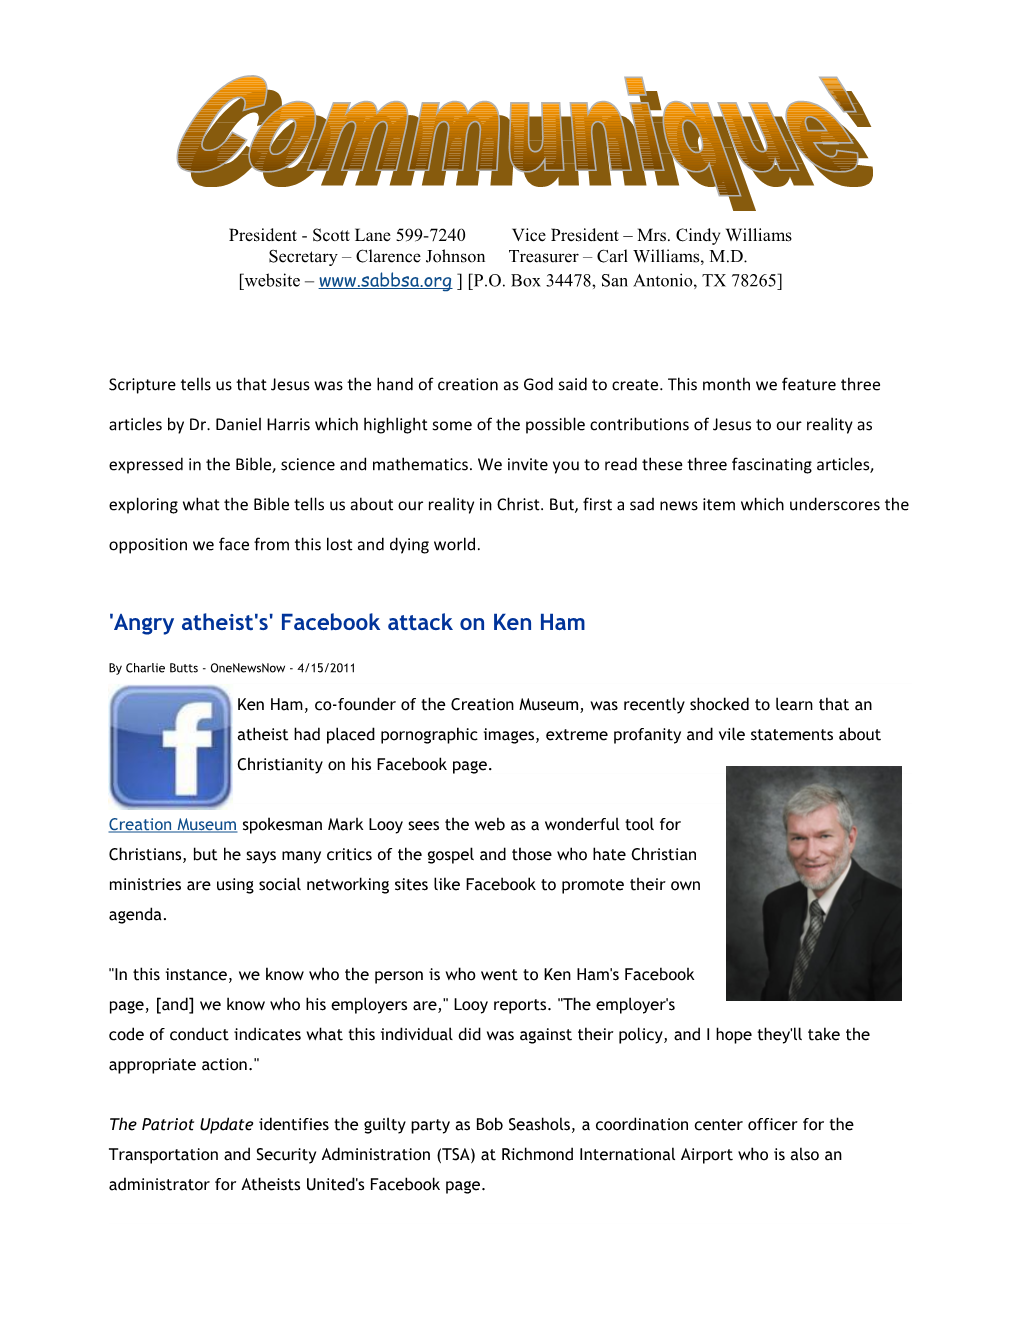 'Angry Atheist's' Facebook Attack on Ken Ham